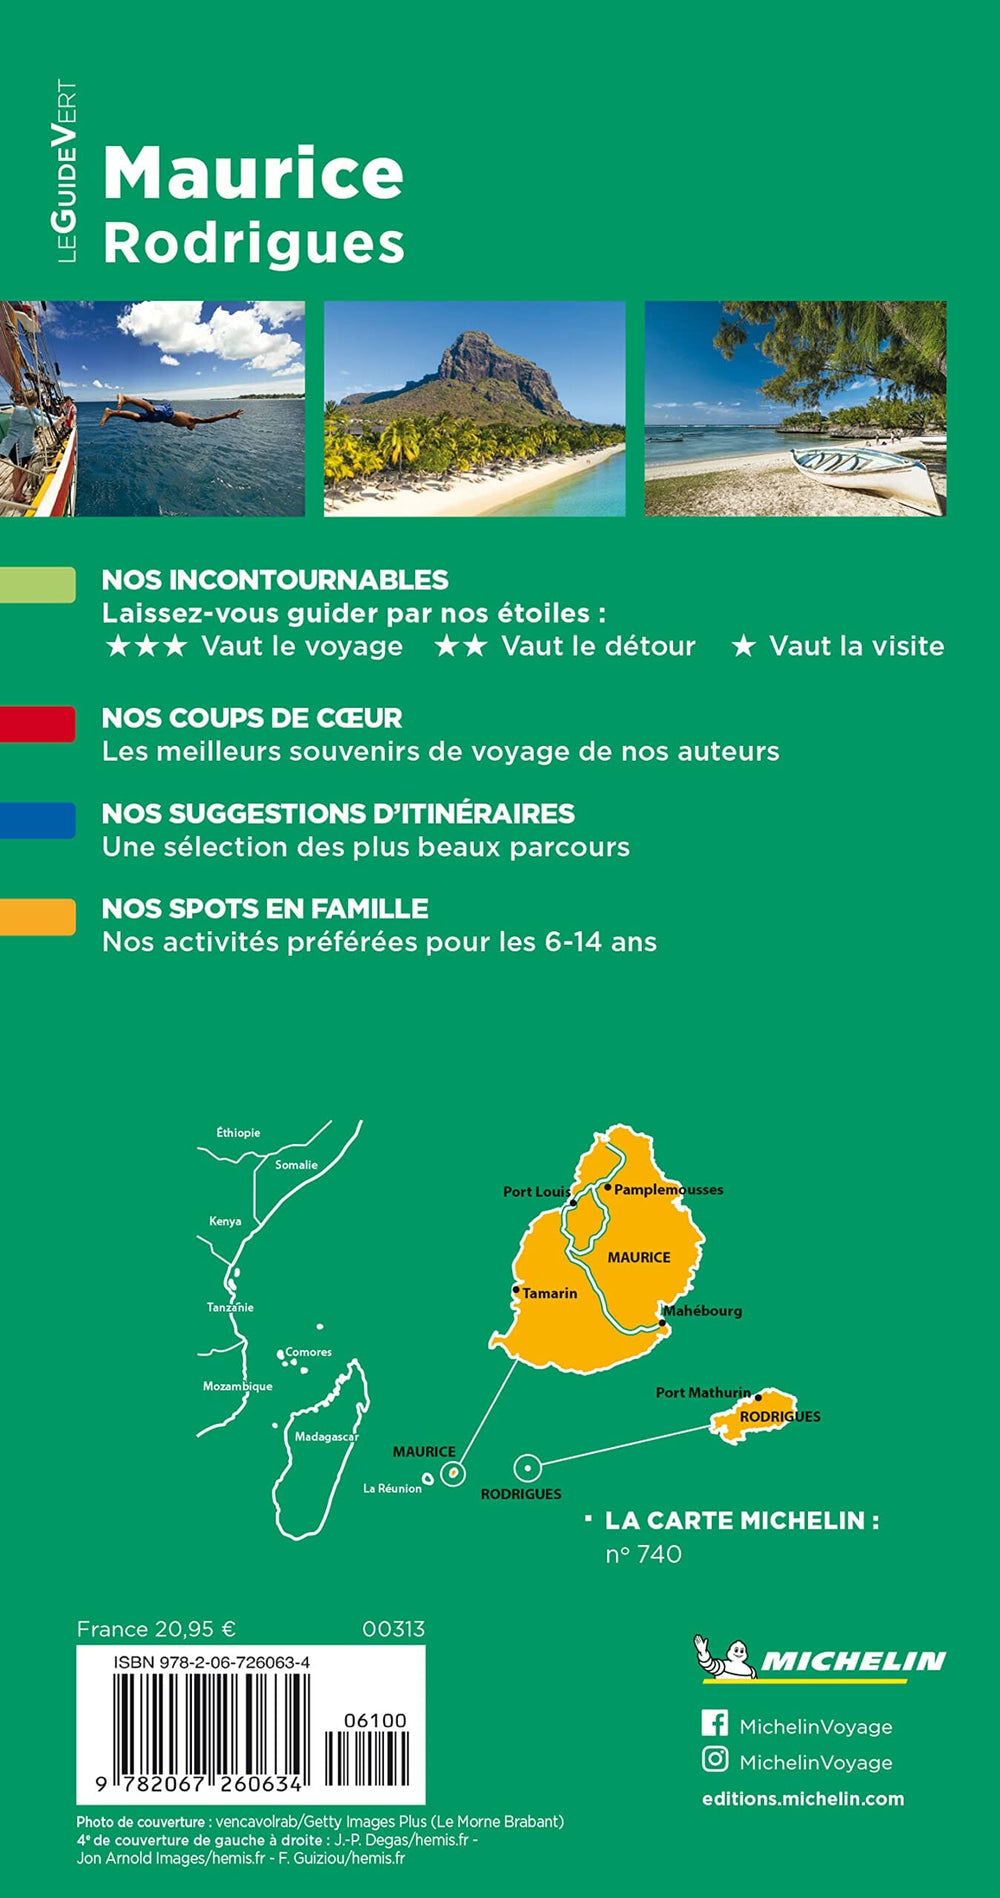 Guide Vert - Maurice, Rodrigues - Édition 2023 | Michelin guide de voyage Michelin 